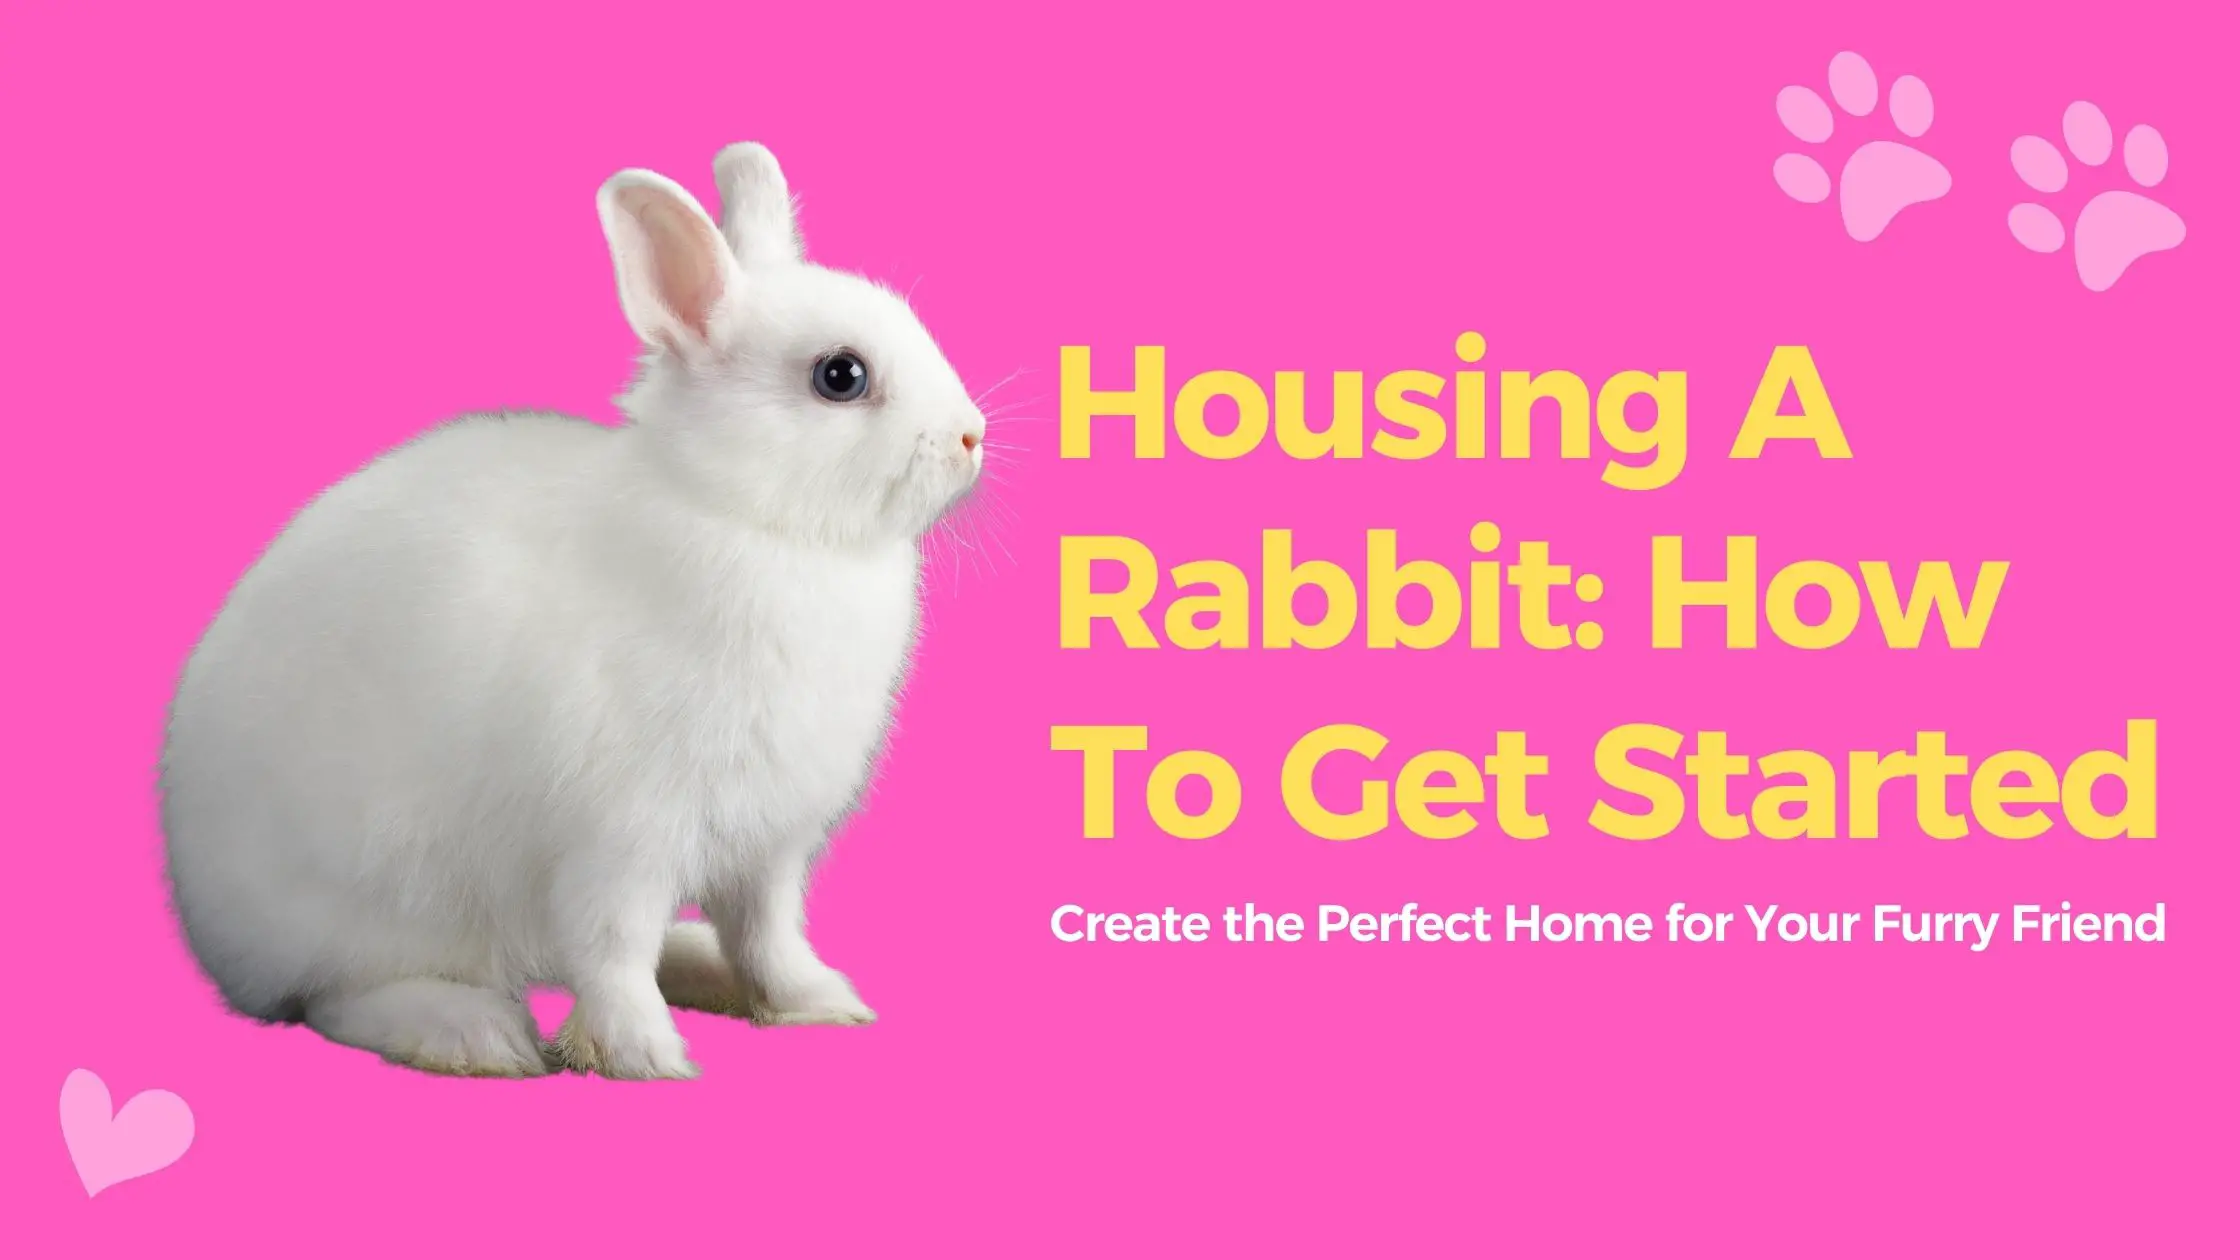 Housing A Rabbit: How To Get Started